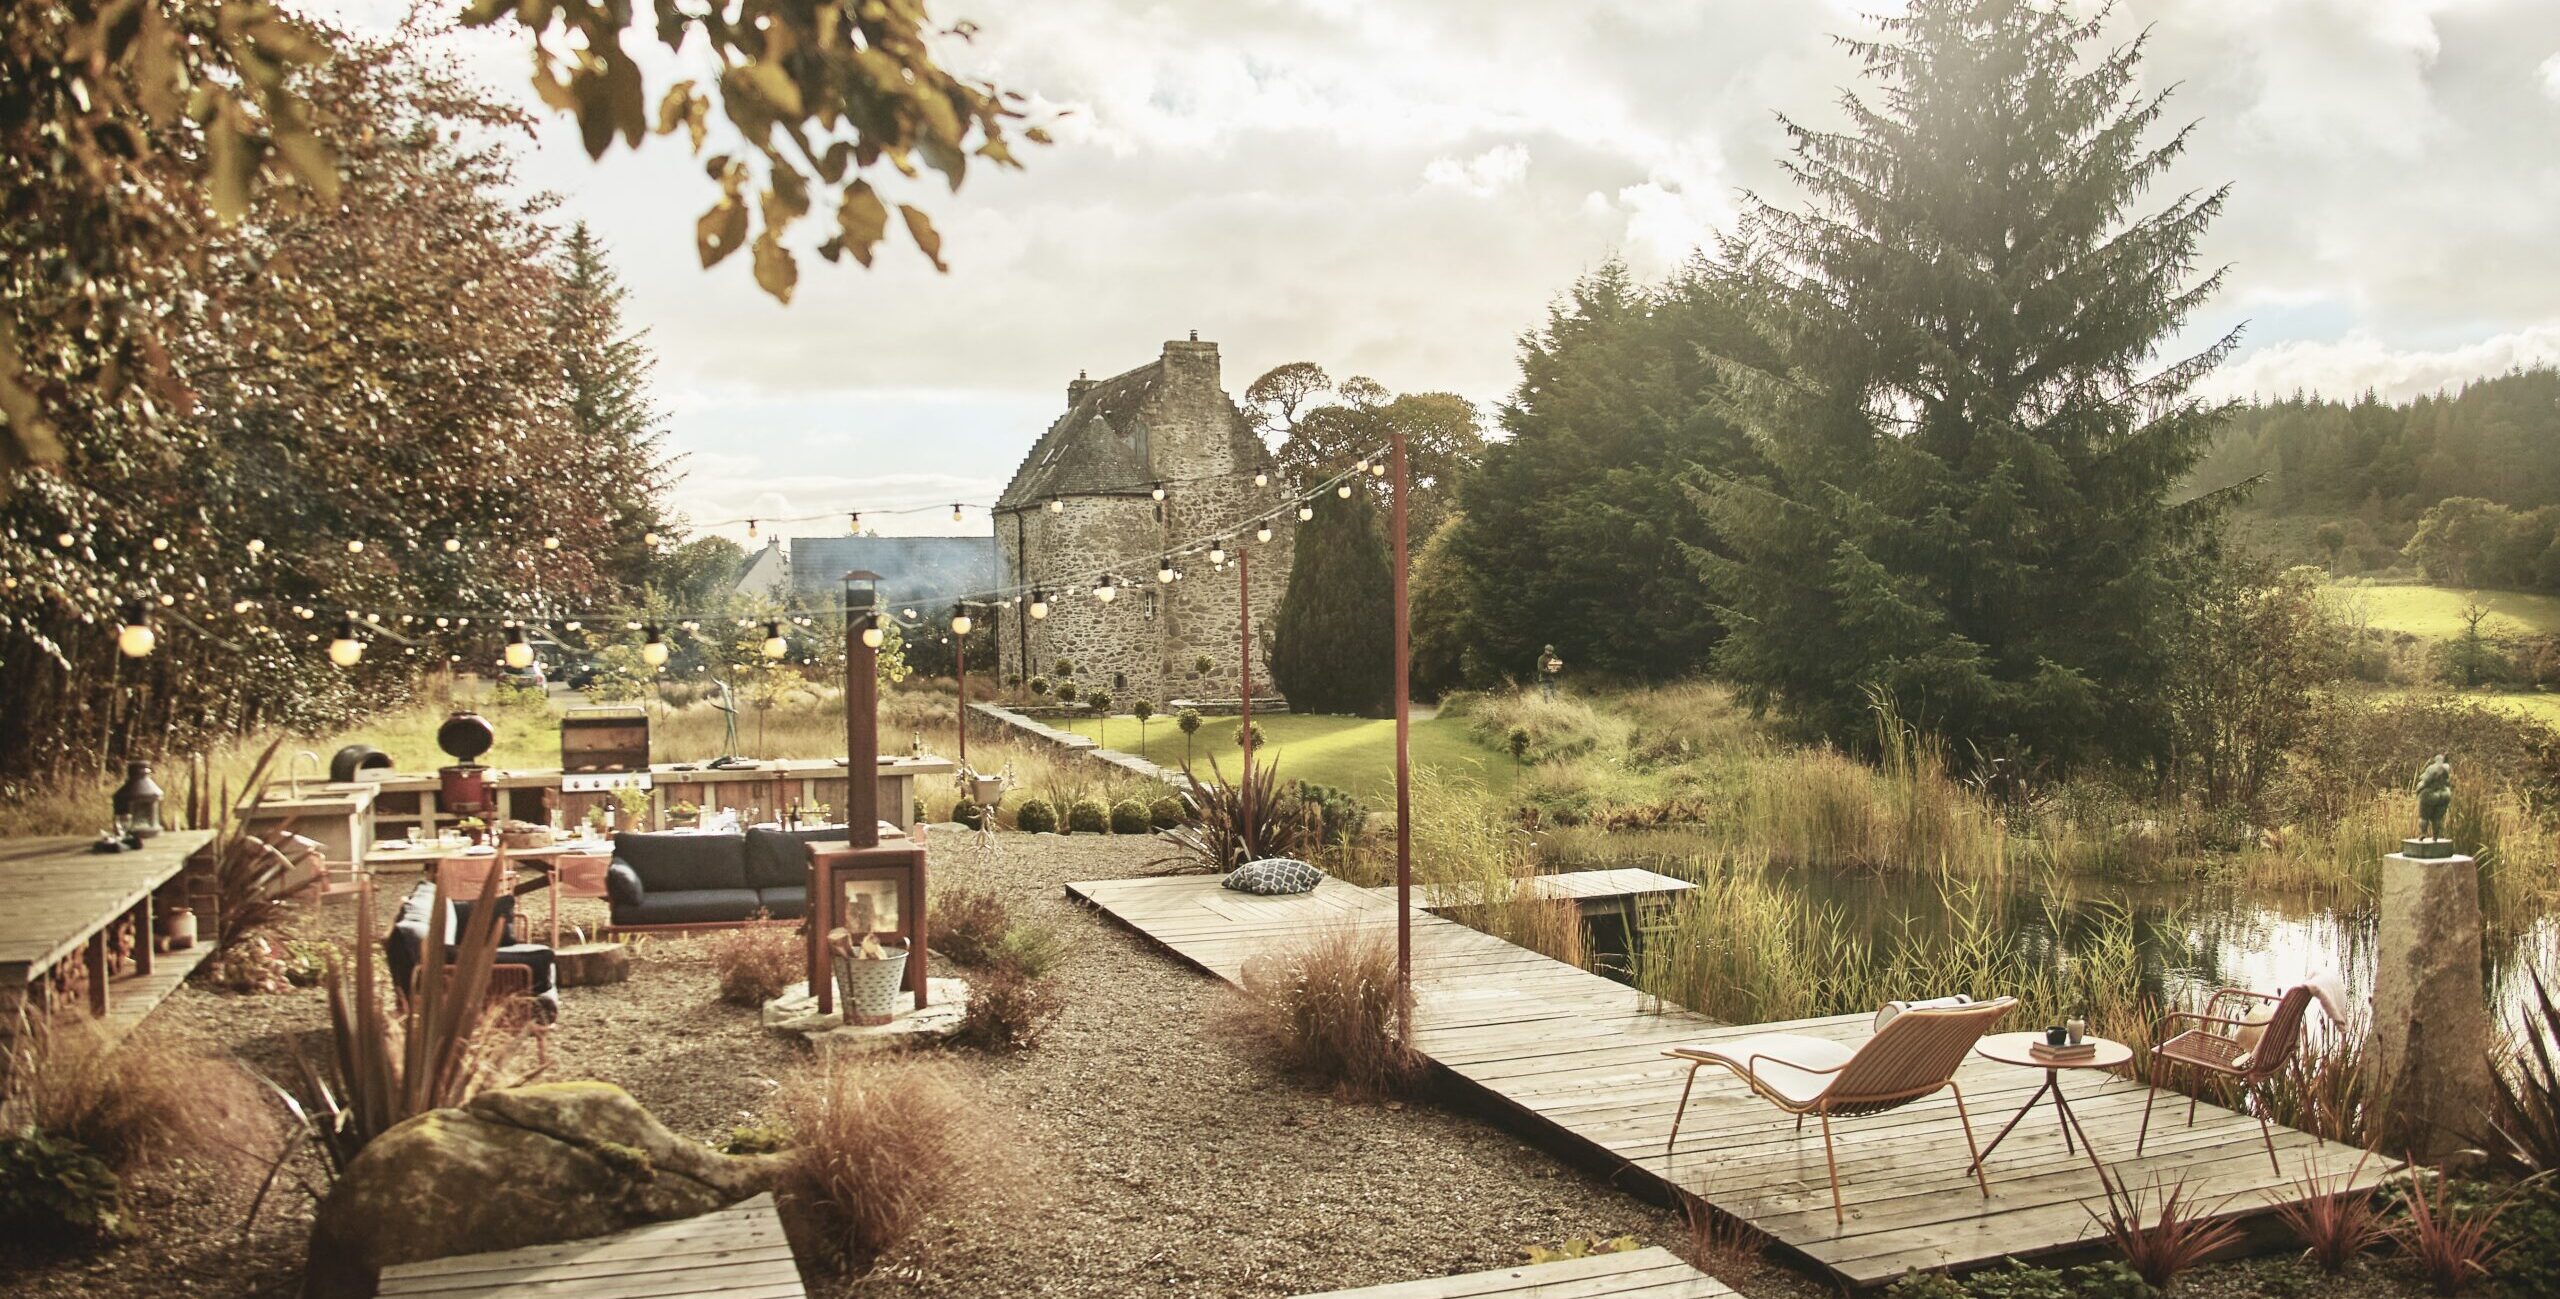 Outdoor seating area at Argyll Castle